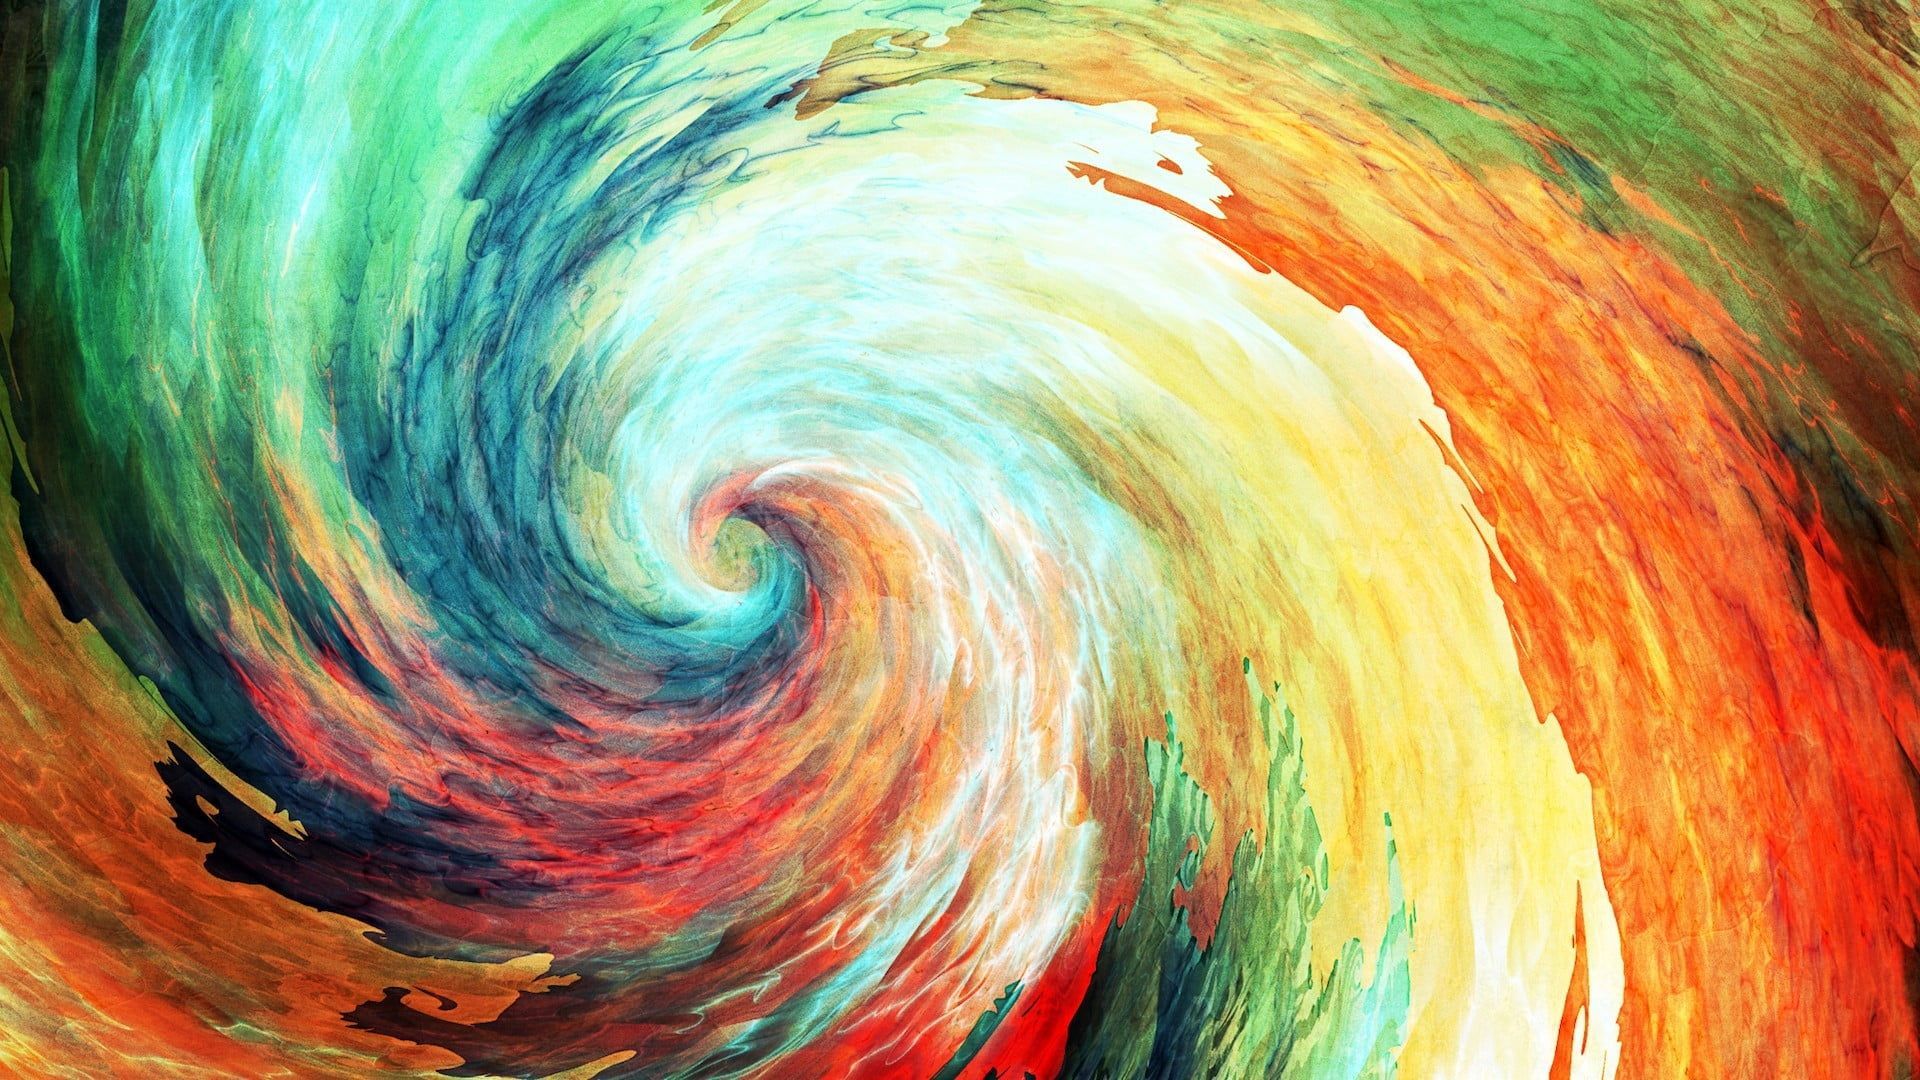 multicolored swirl painting, abstract painting #colorful #painting #anime #spiral #abstract #artwork #hurrican. Abstract art wallpaper, Abstract art painting, Art